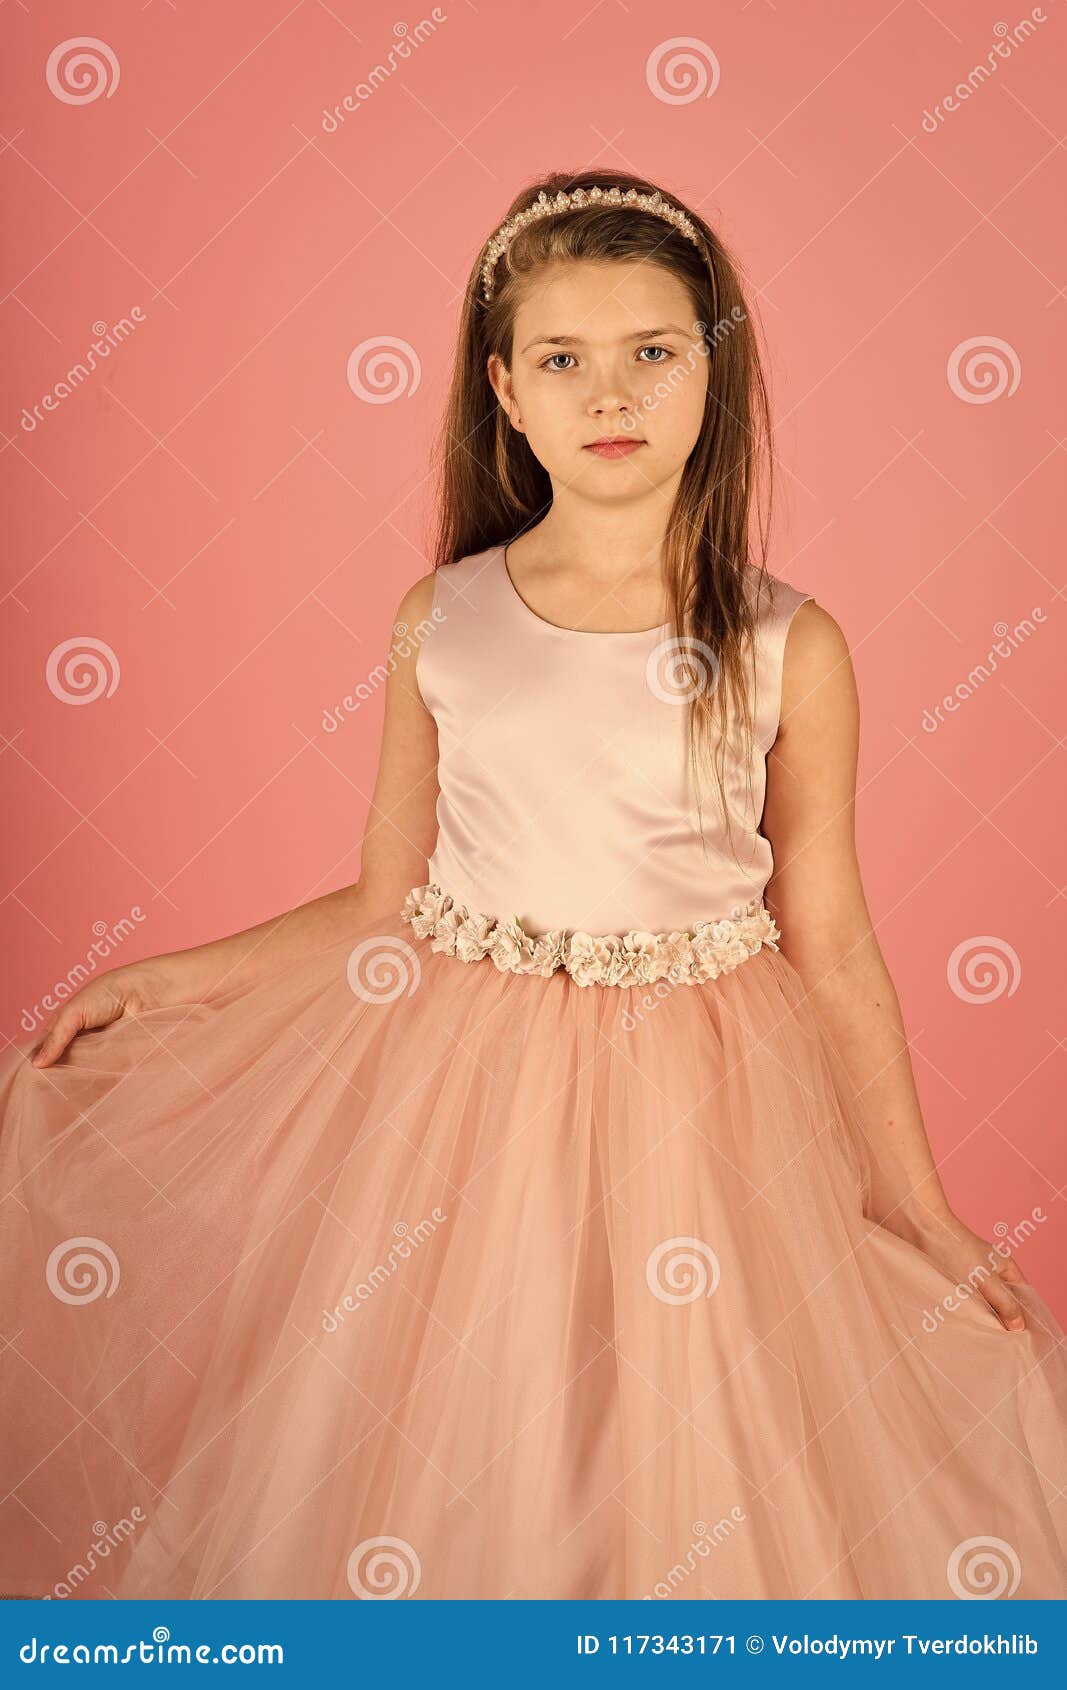 Face Kid For Magazine Cover Girl Kids Face Portrait In Your Advertisnent Fashion Model On Pink Background Beauty Stock Image Image Of Celebration Look 117343171